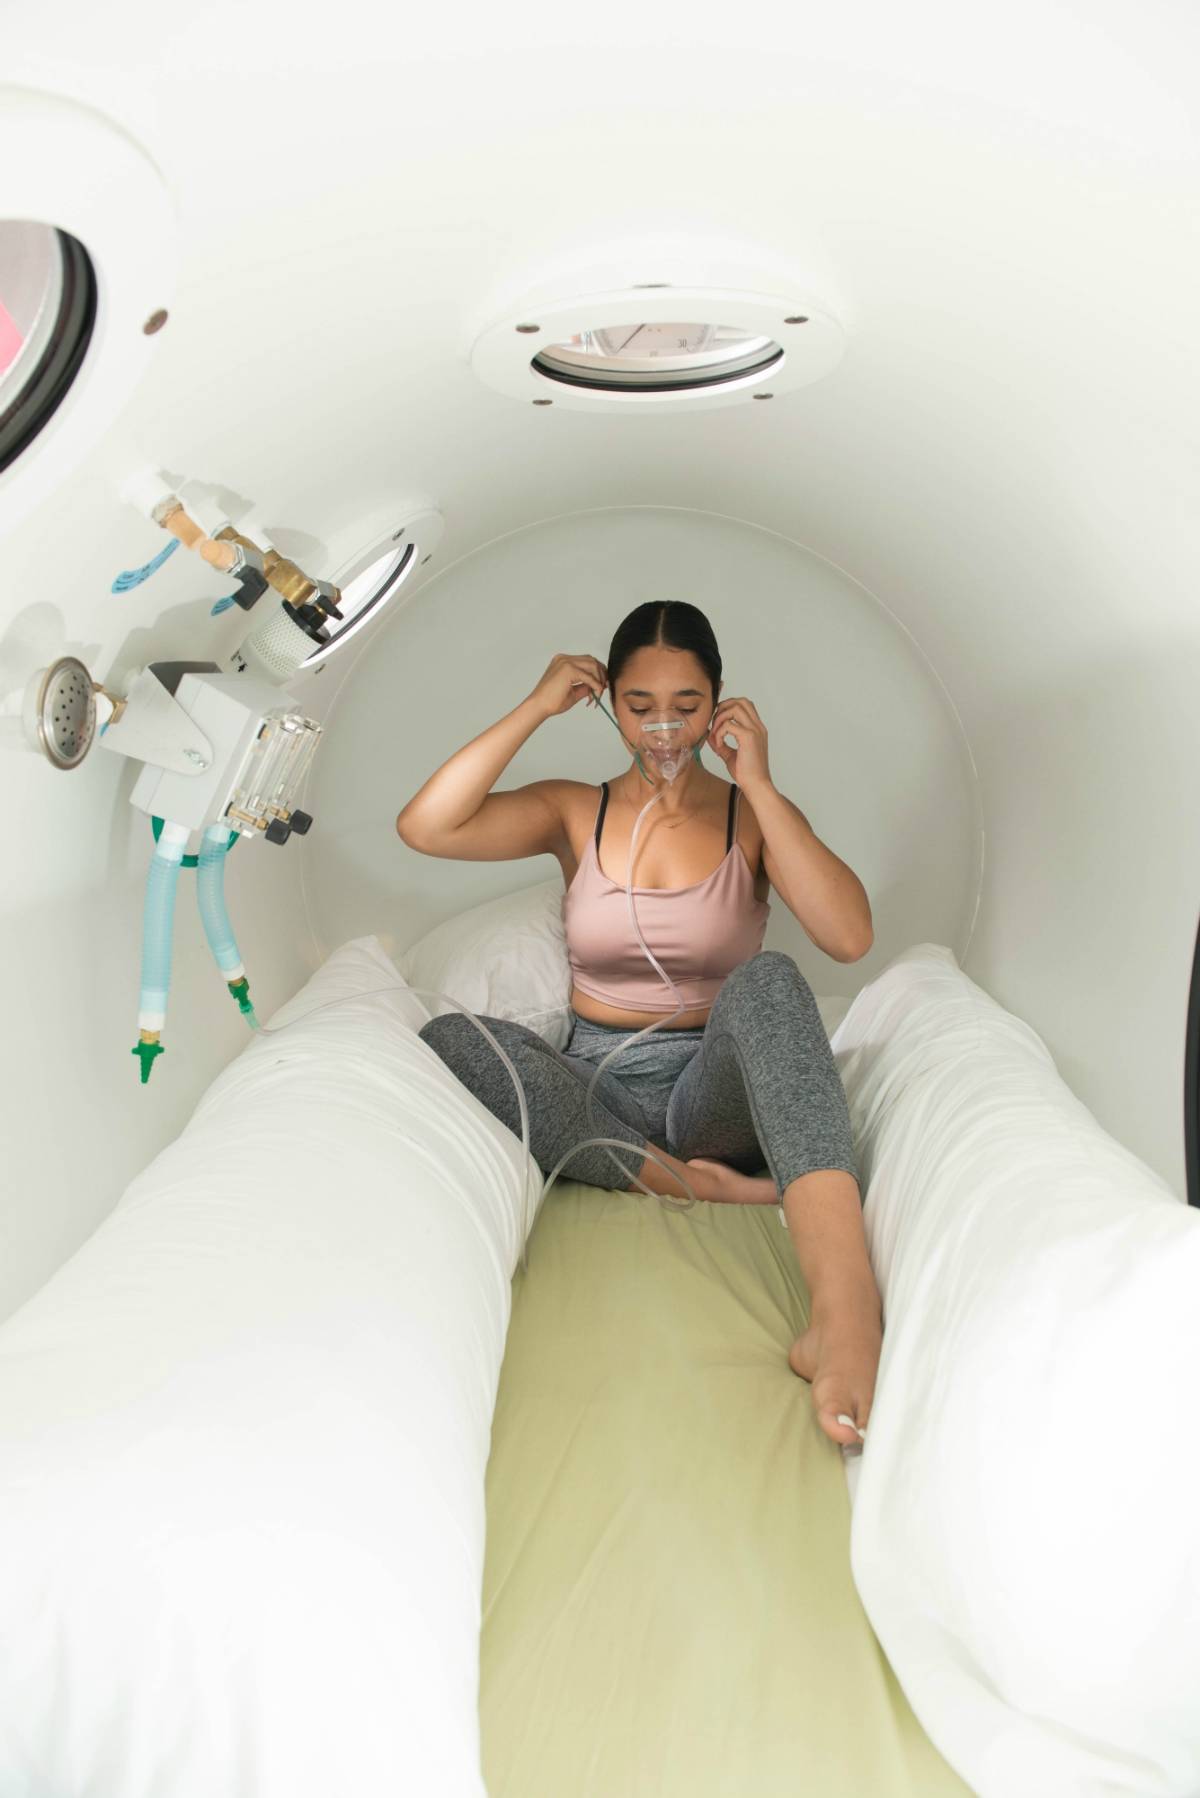 Woman in a hyperbaric chamber, about to get treatment